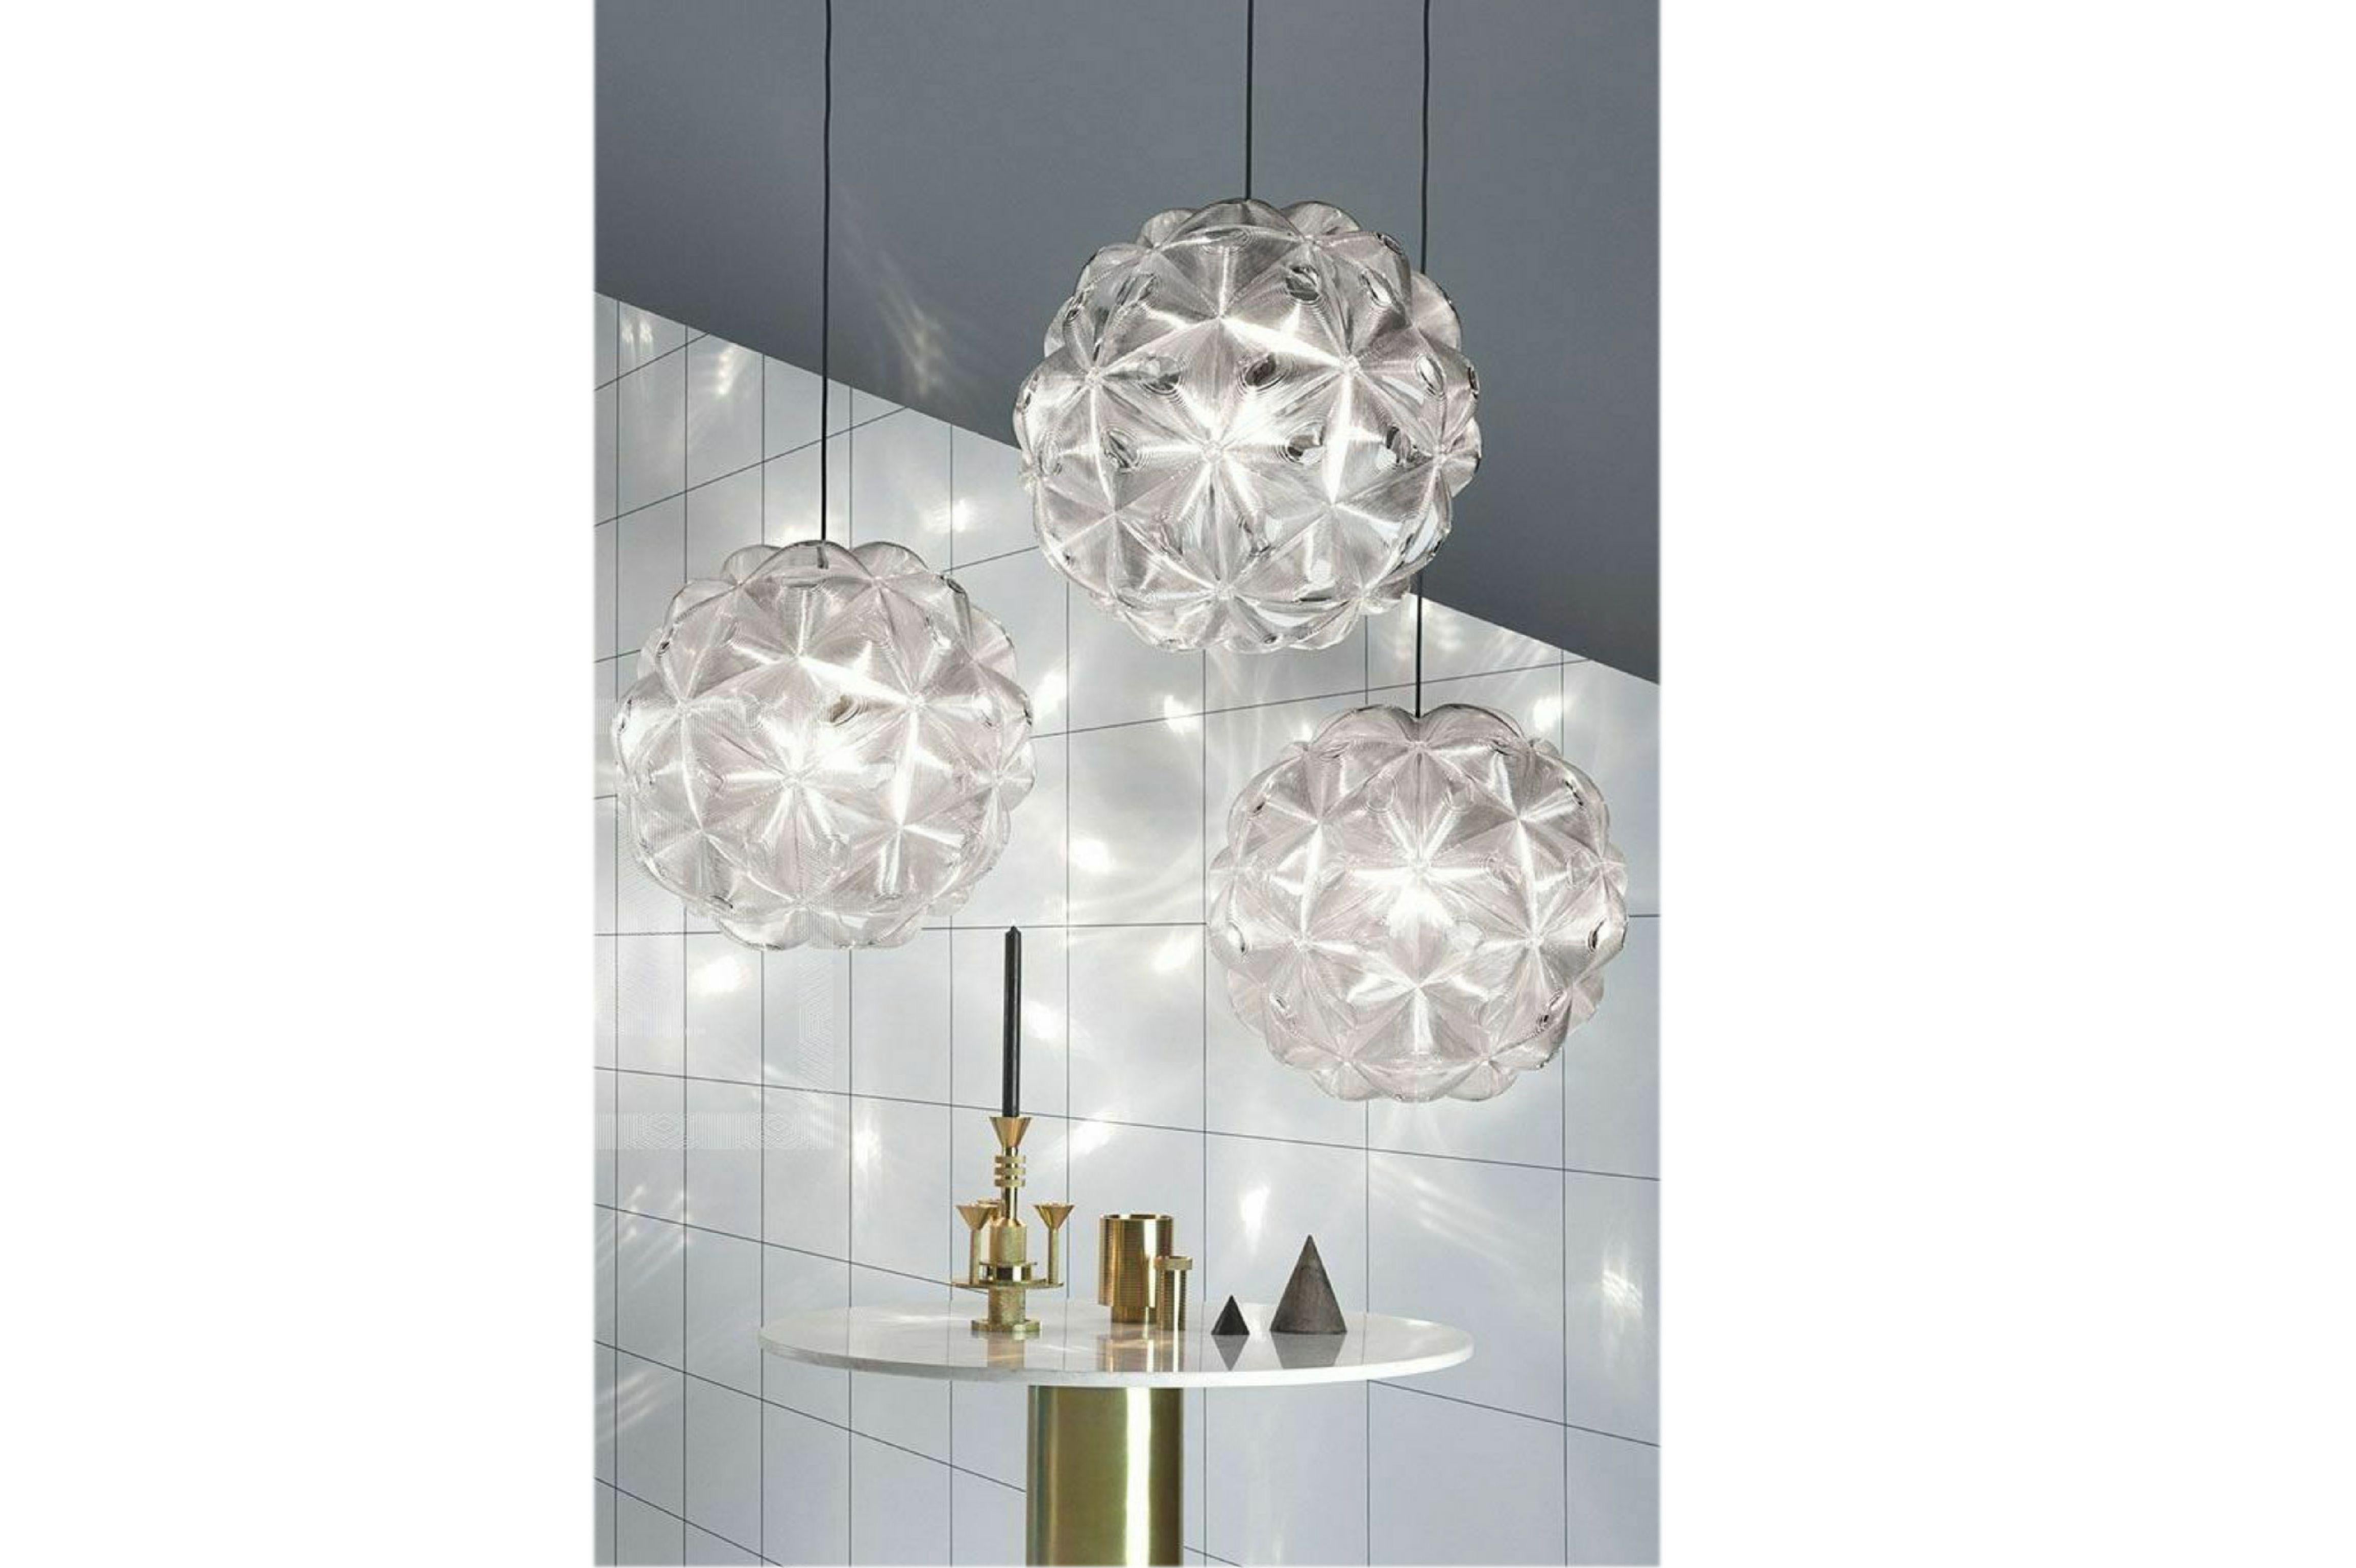 Tom Dixon lens pendant, spherical ceiling light, globe chandelier, 2019. A spherical pendant light made of 60 triangular polycarbonate lenses that refract and focus the lightbulb in an unusually luminous way. MSRP 1080 USD.
 Cable length